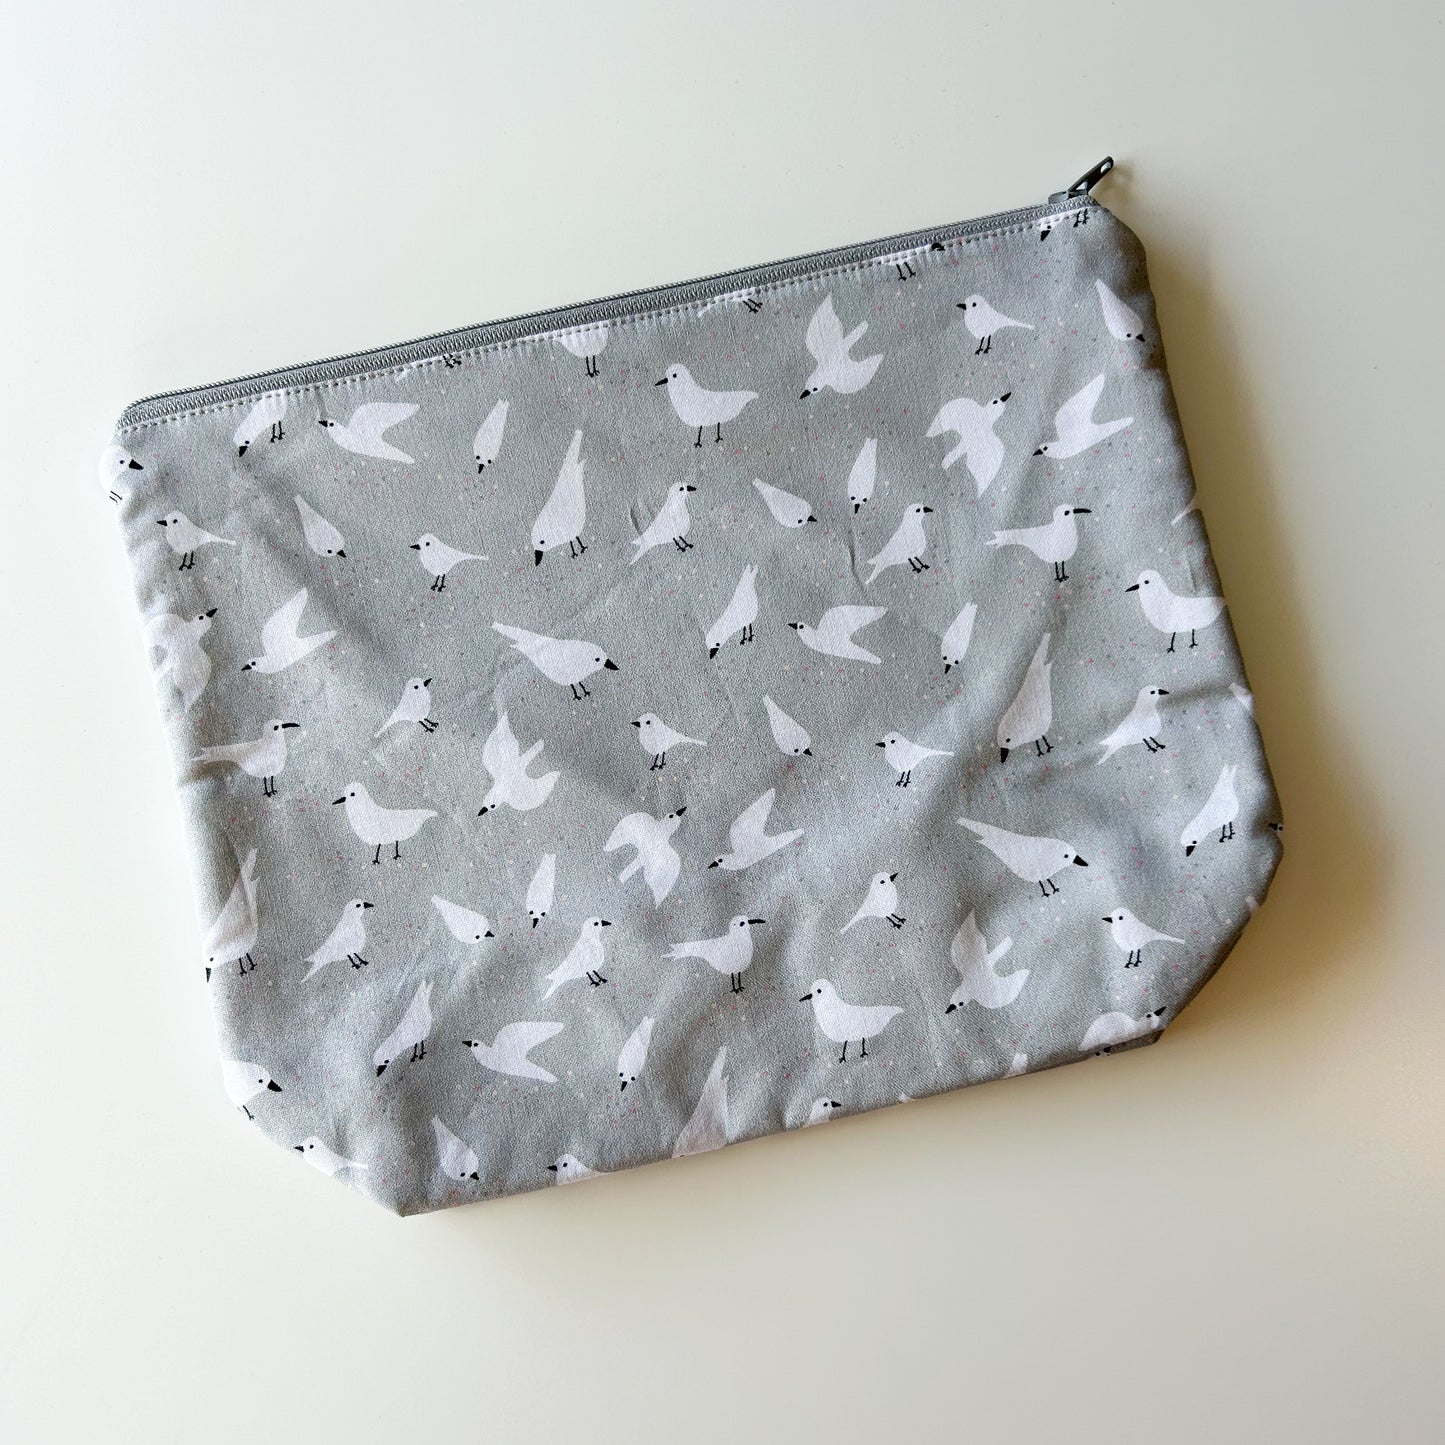 Sock Project Bag - Grey with Seagulls